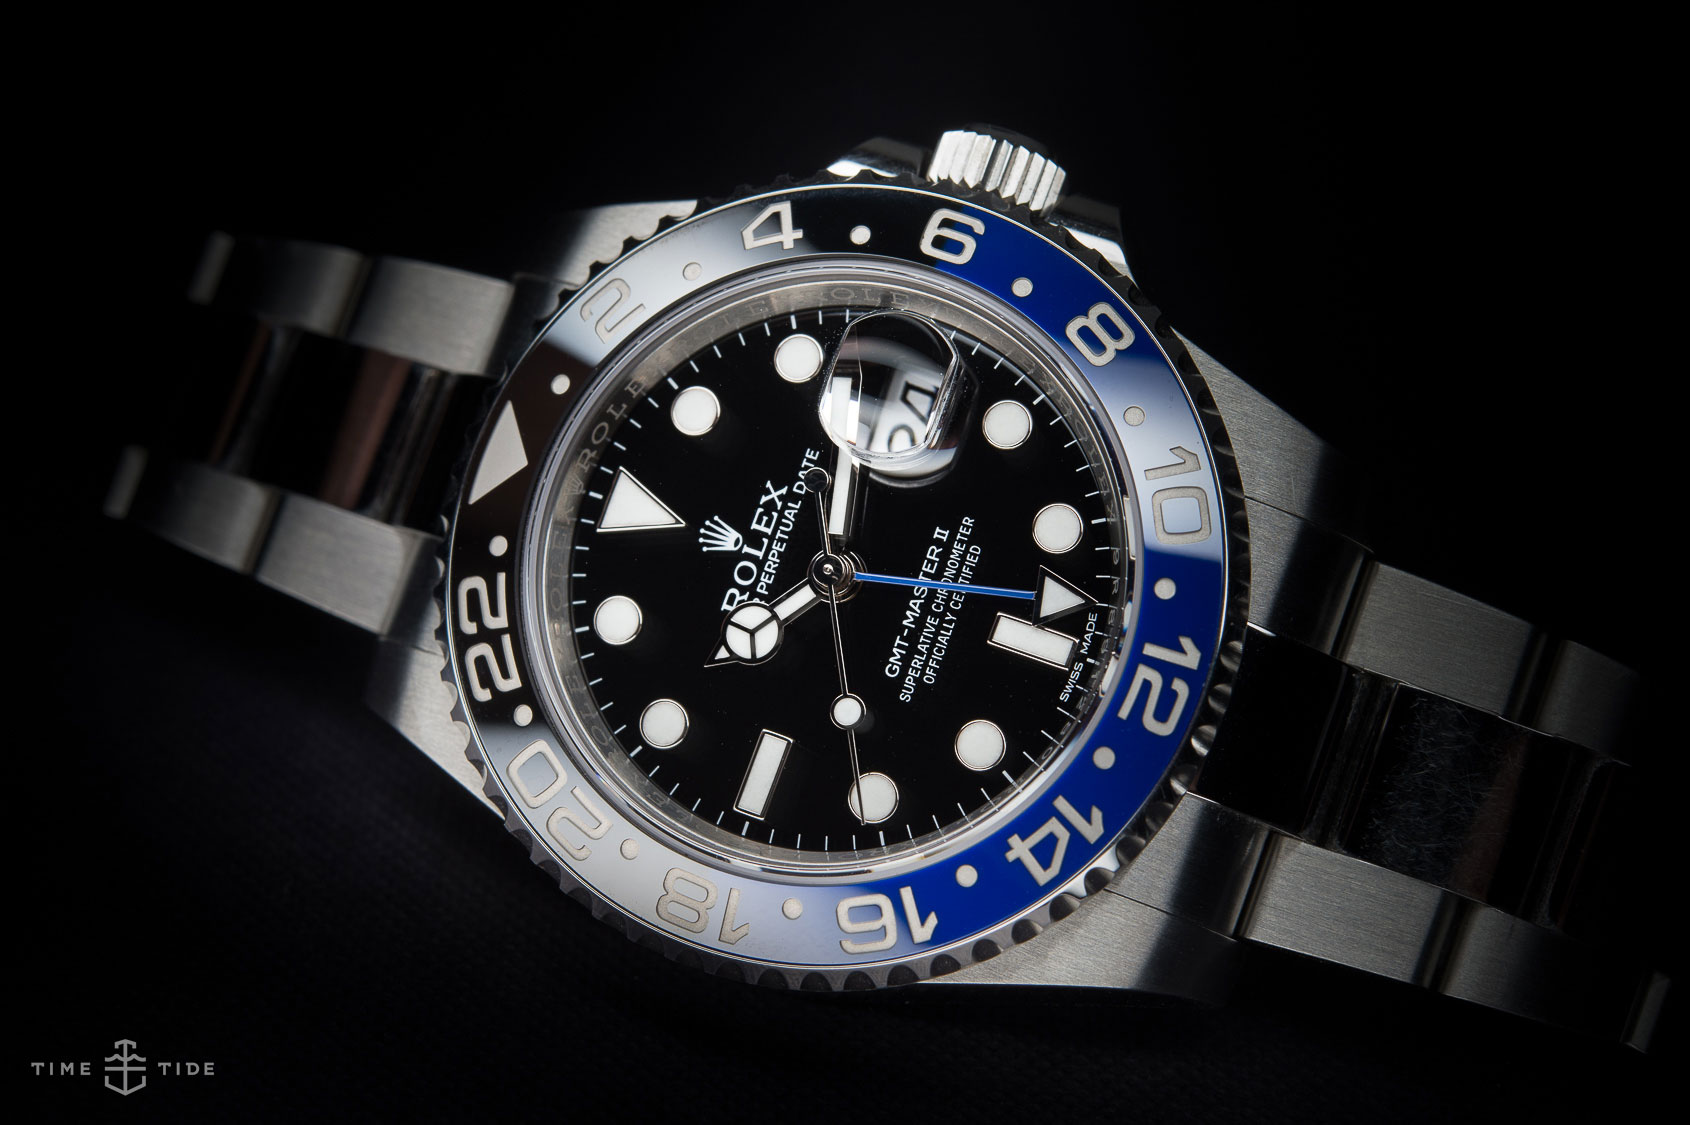 Rolex GMT Master II BLNR In-depth Review